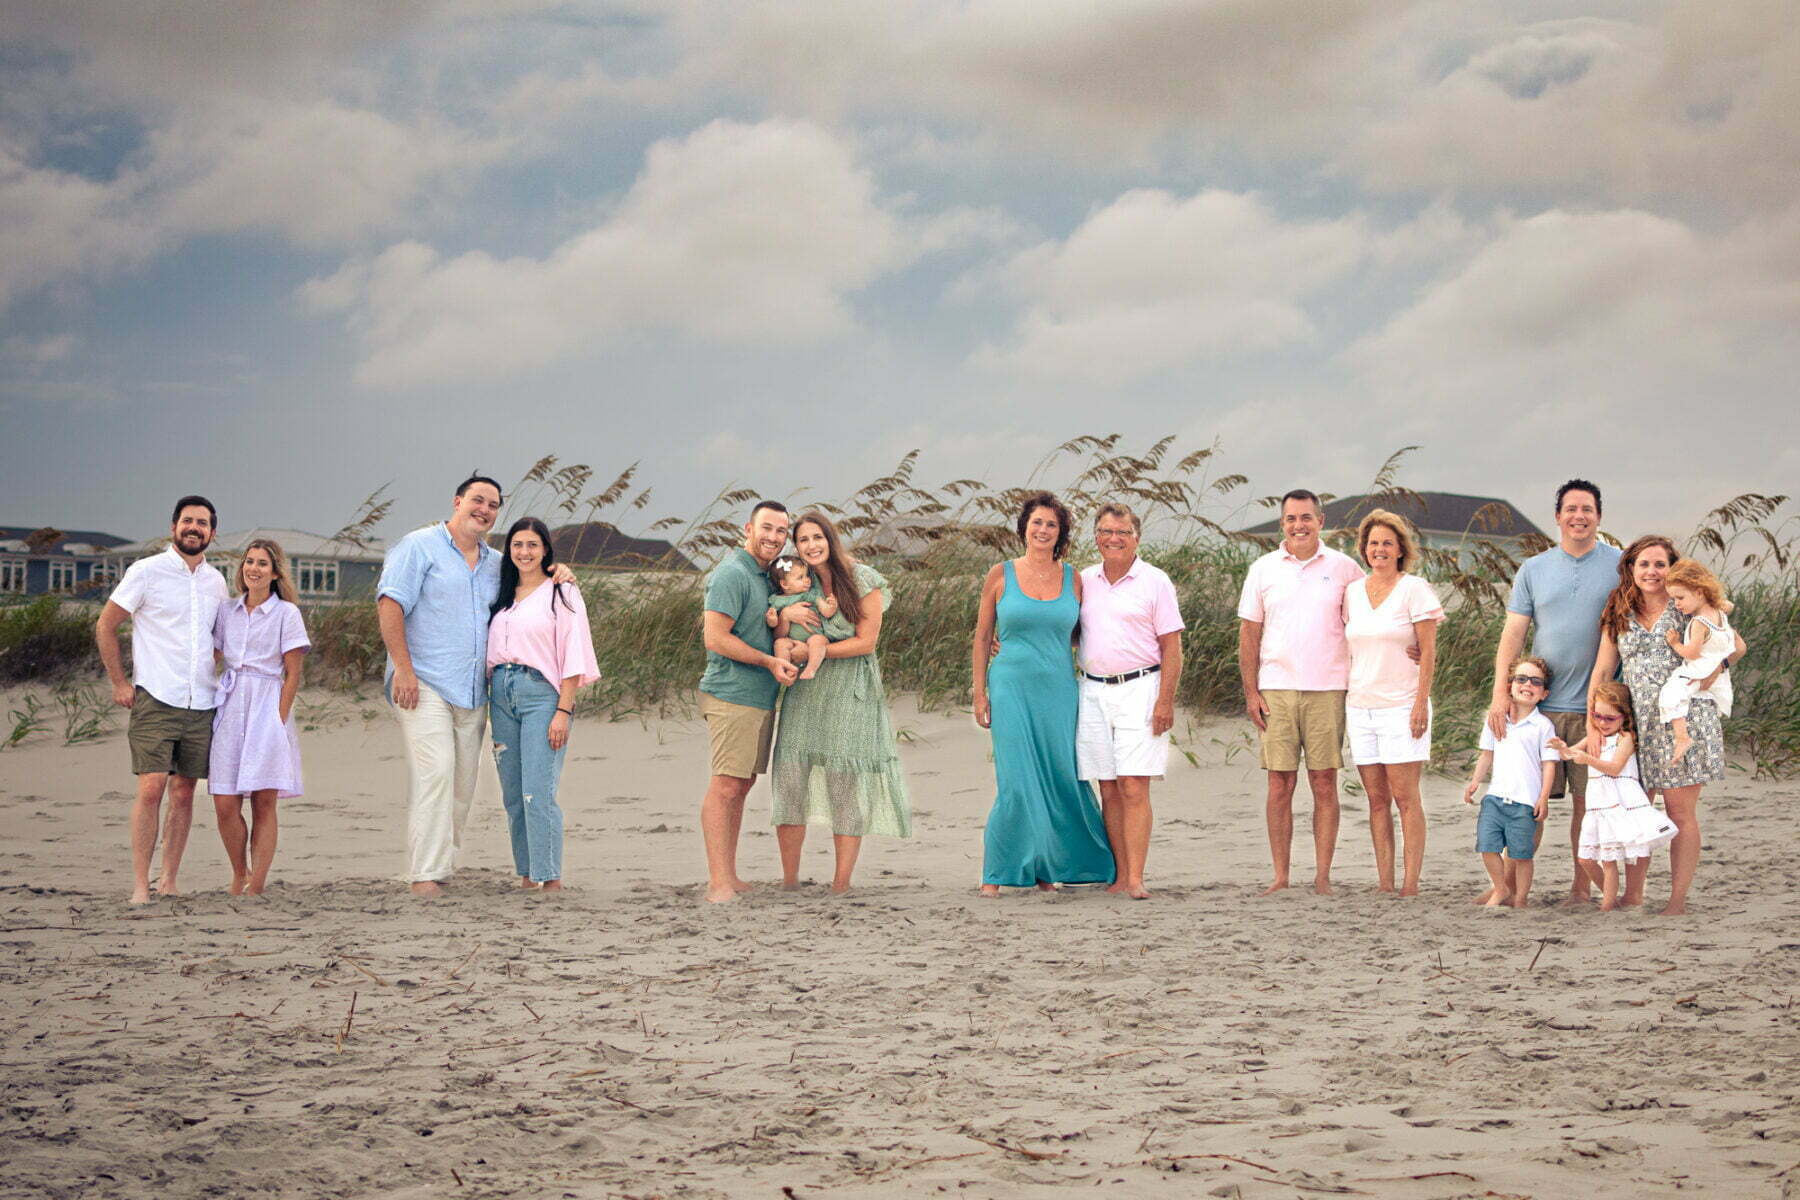 Extended family generational portrait photography session on the beach at Oak Island, North Carolina.